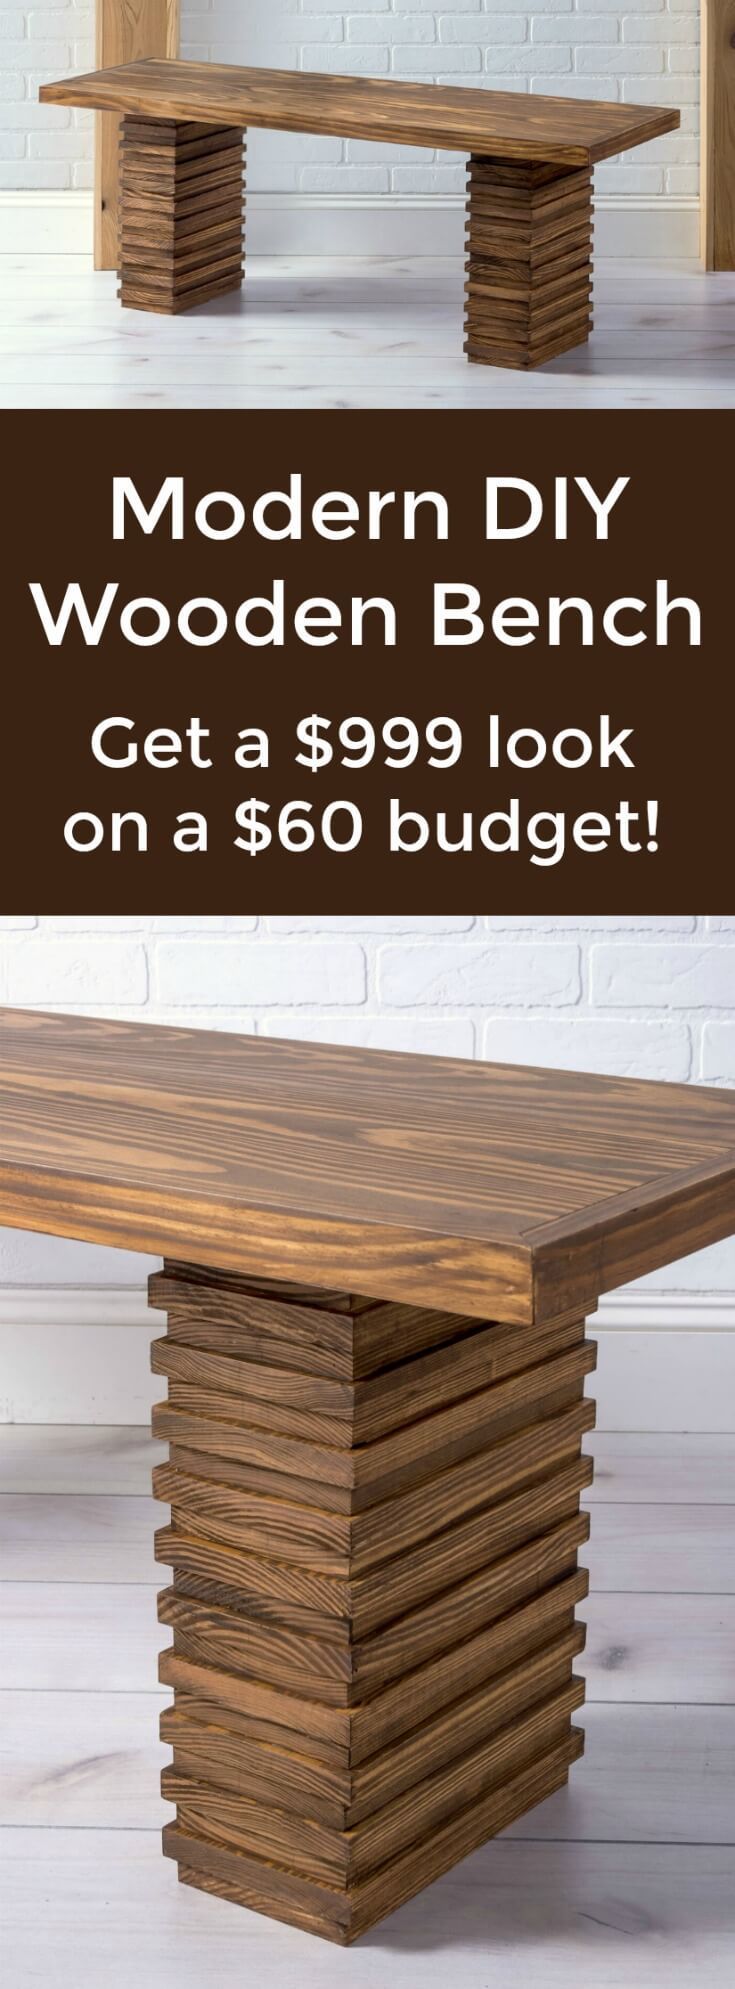 This modern wooden bench was inspired by a Crate and Barrel find for $999 - exce...